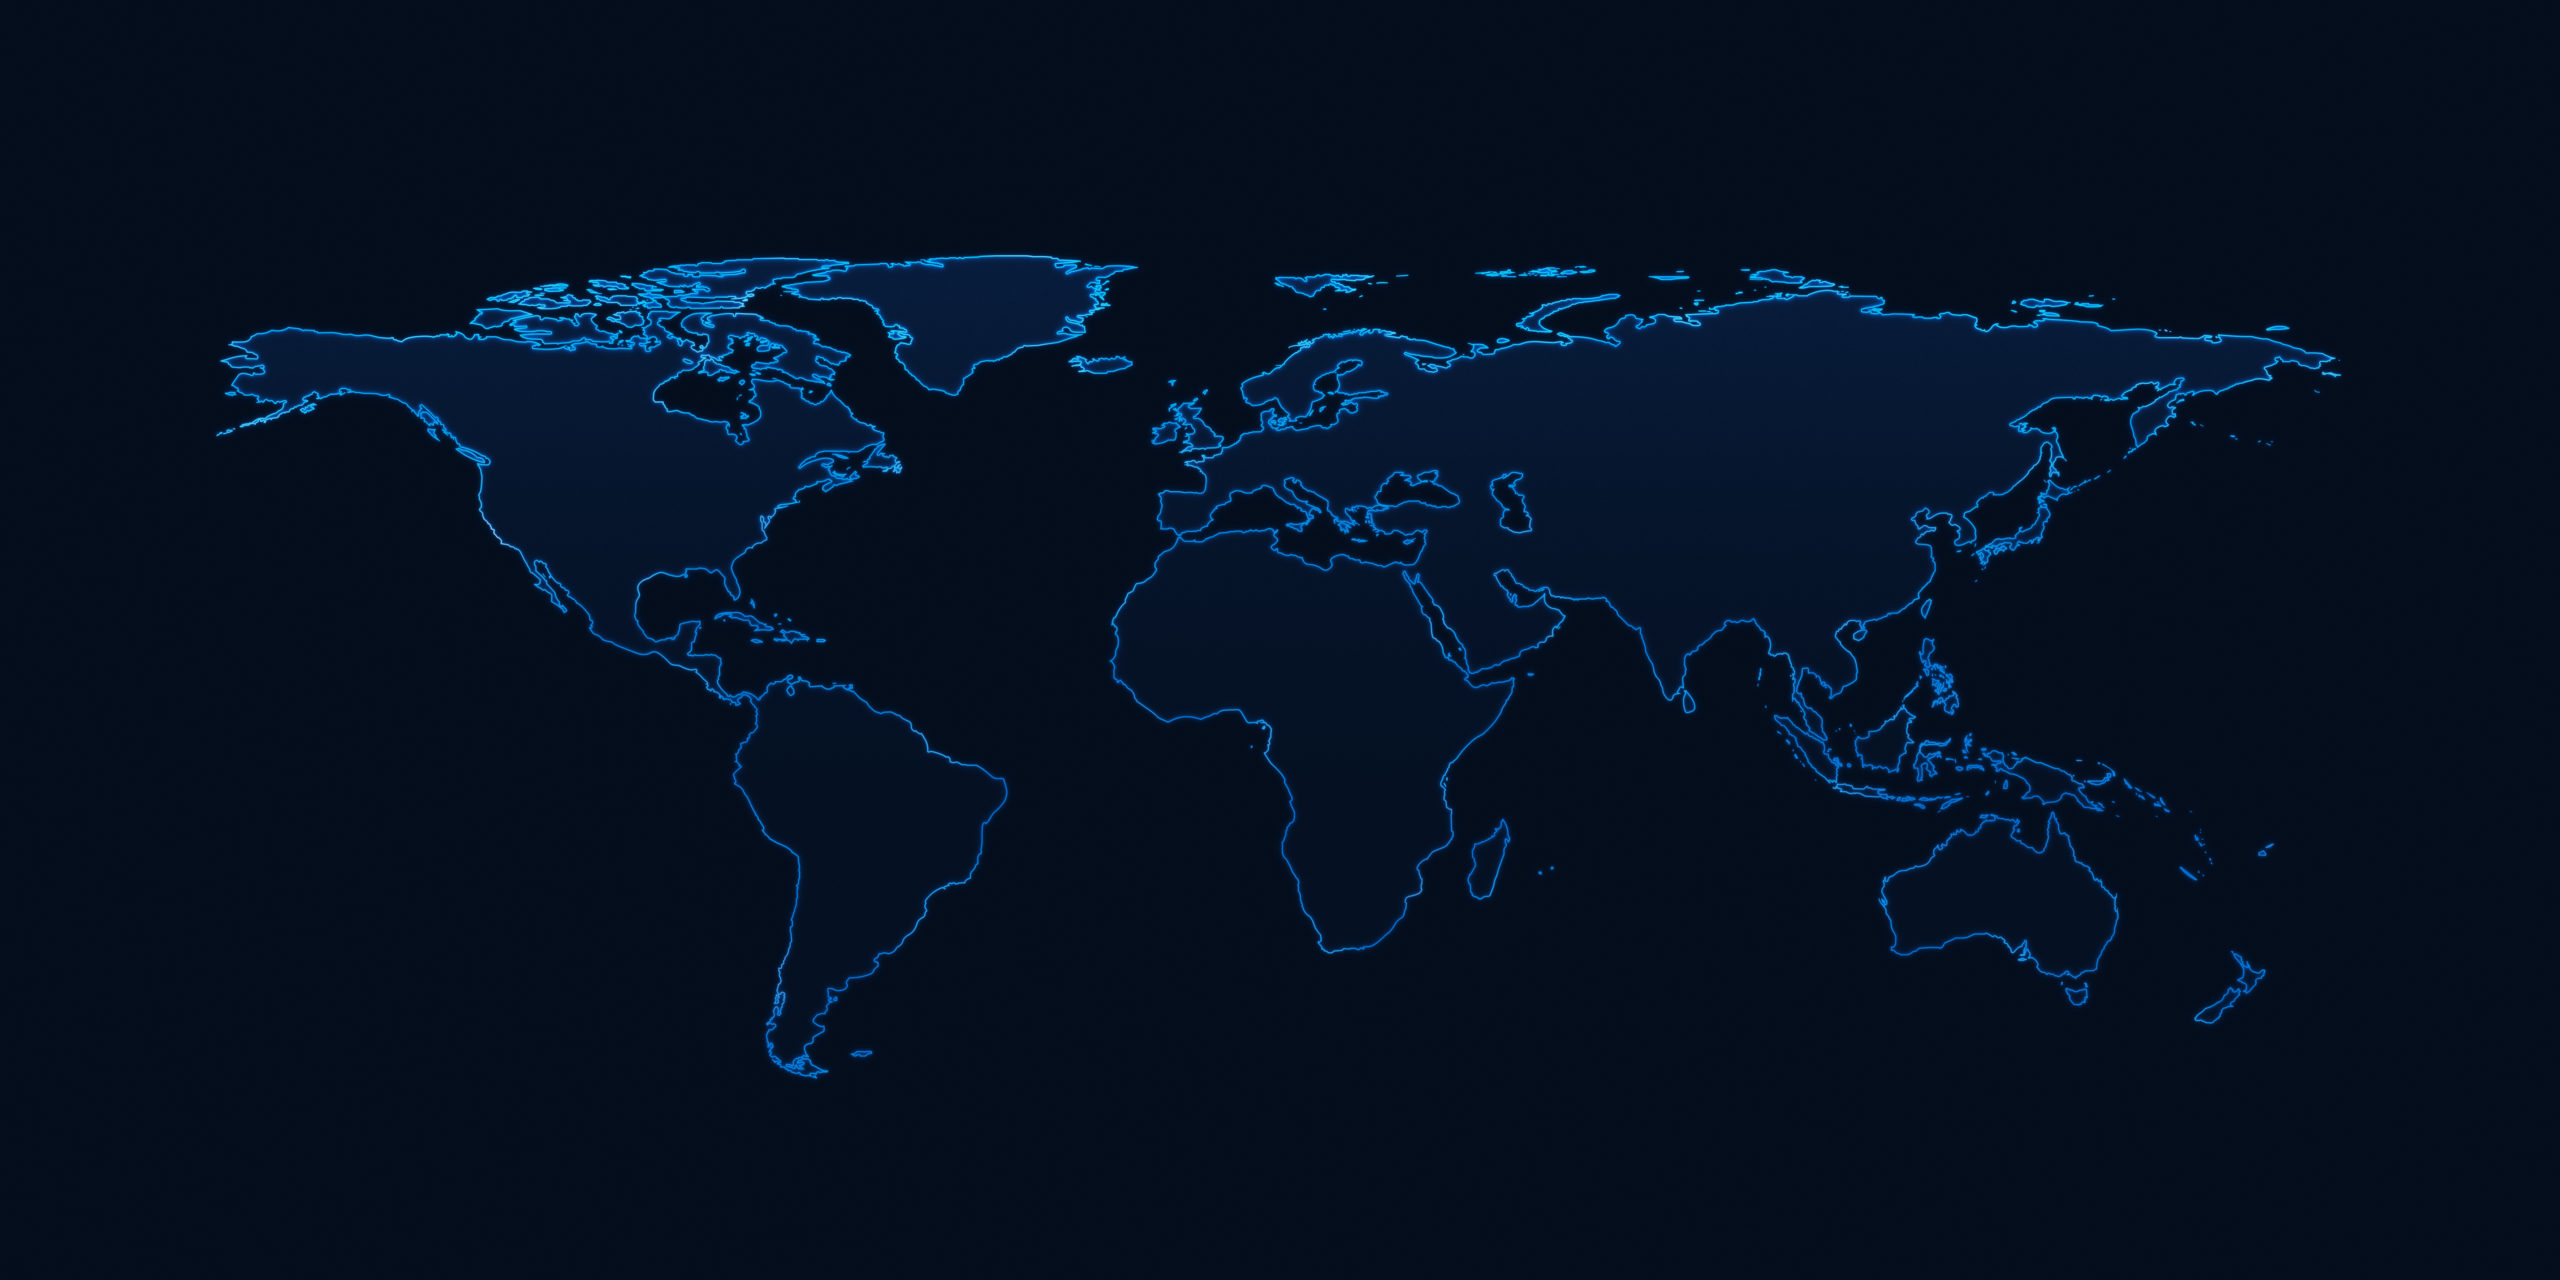 Light blue world map on dark blue background, Elements of this i